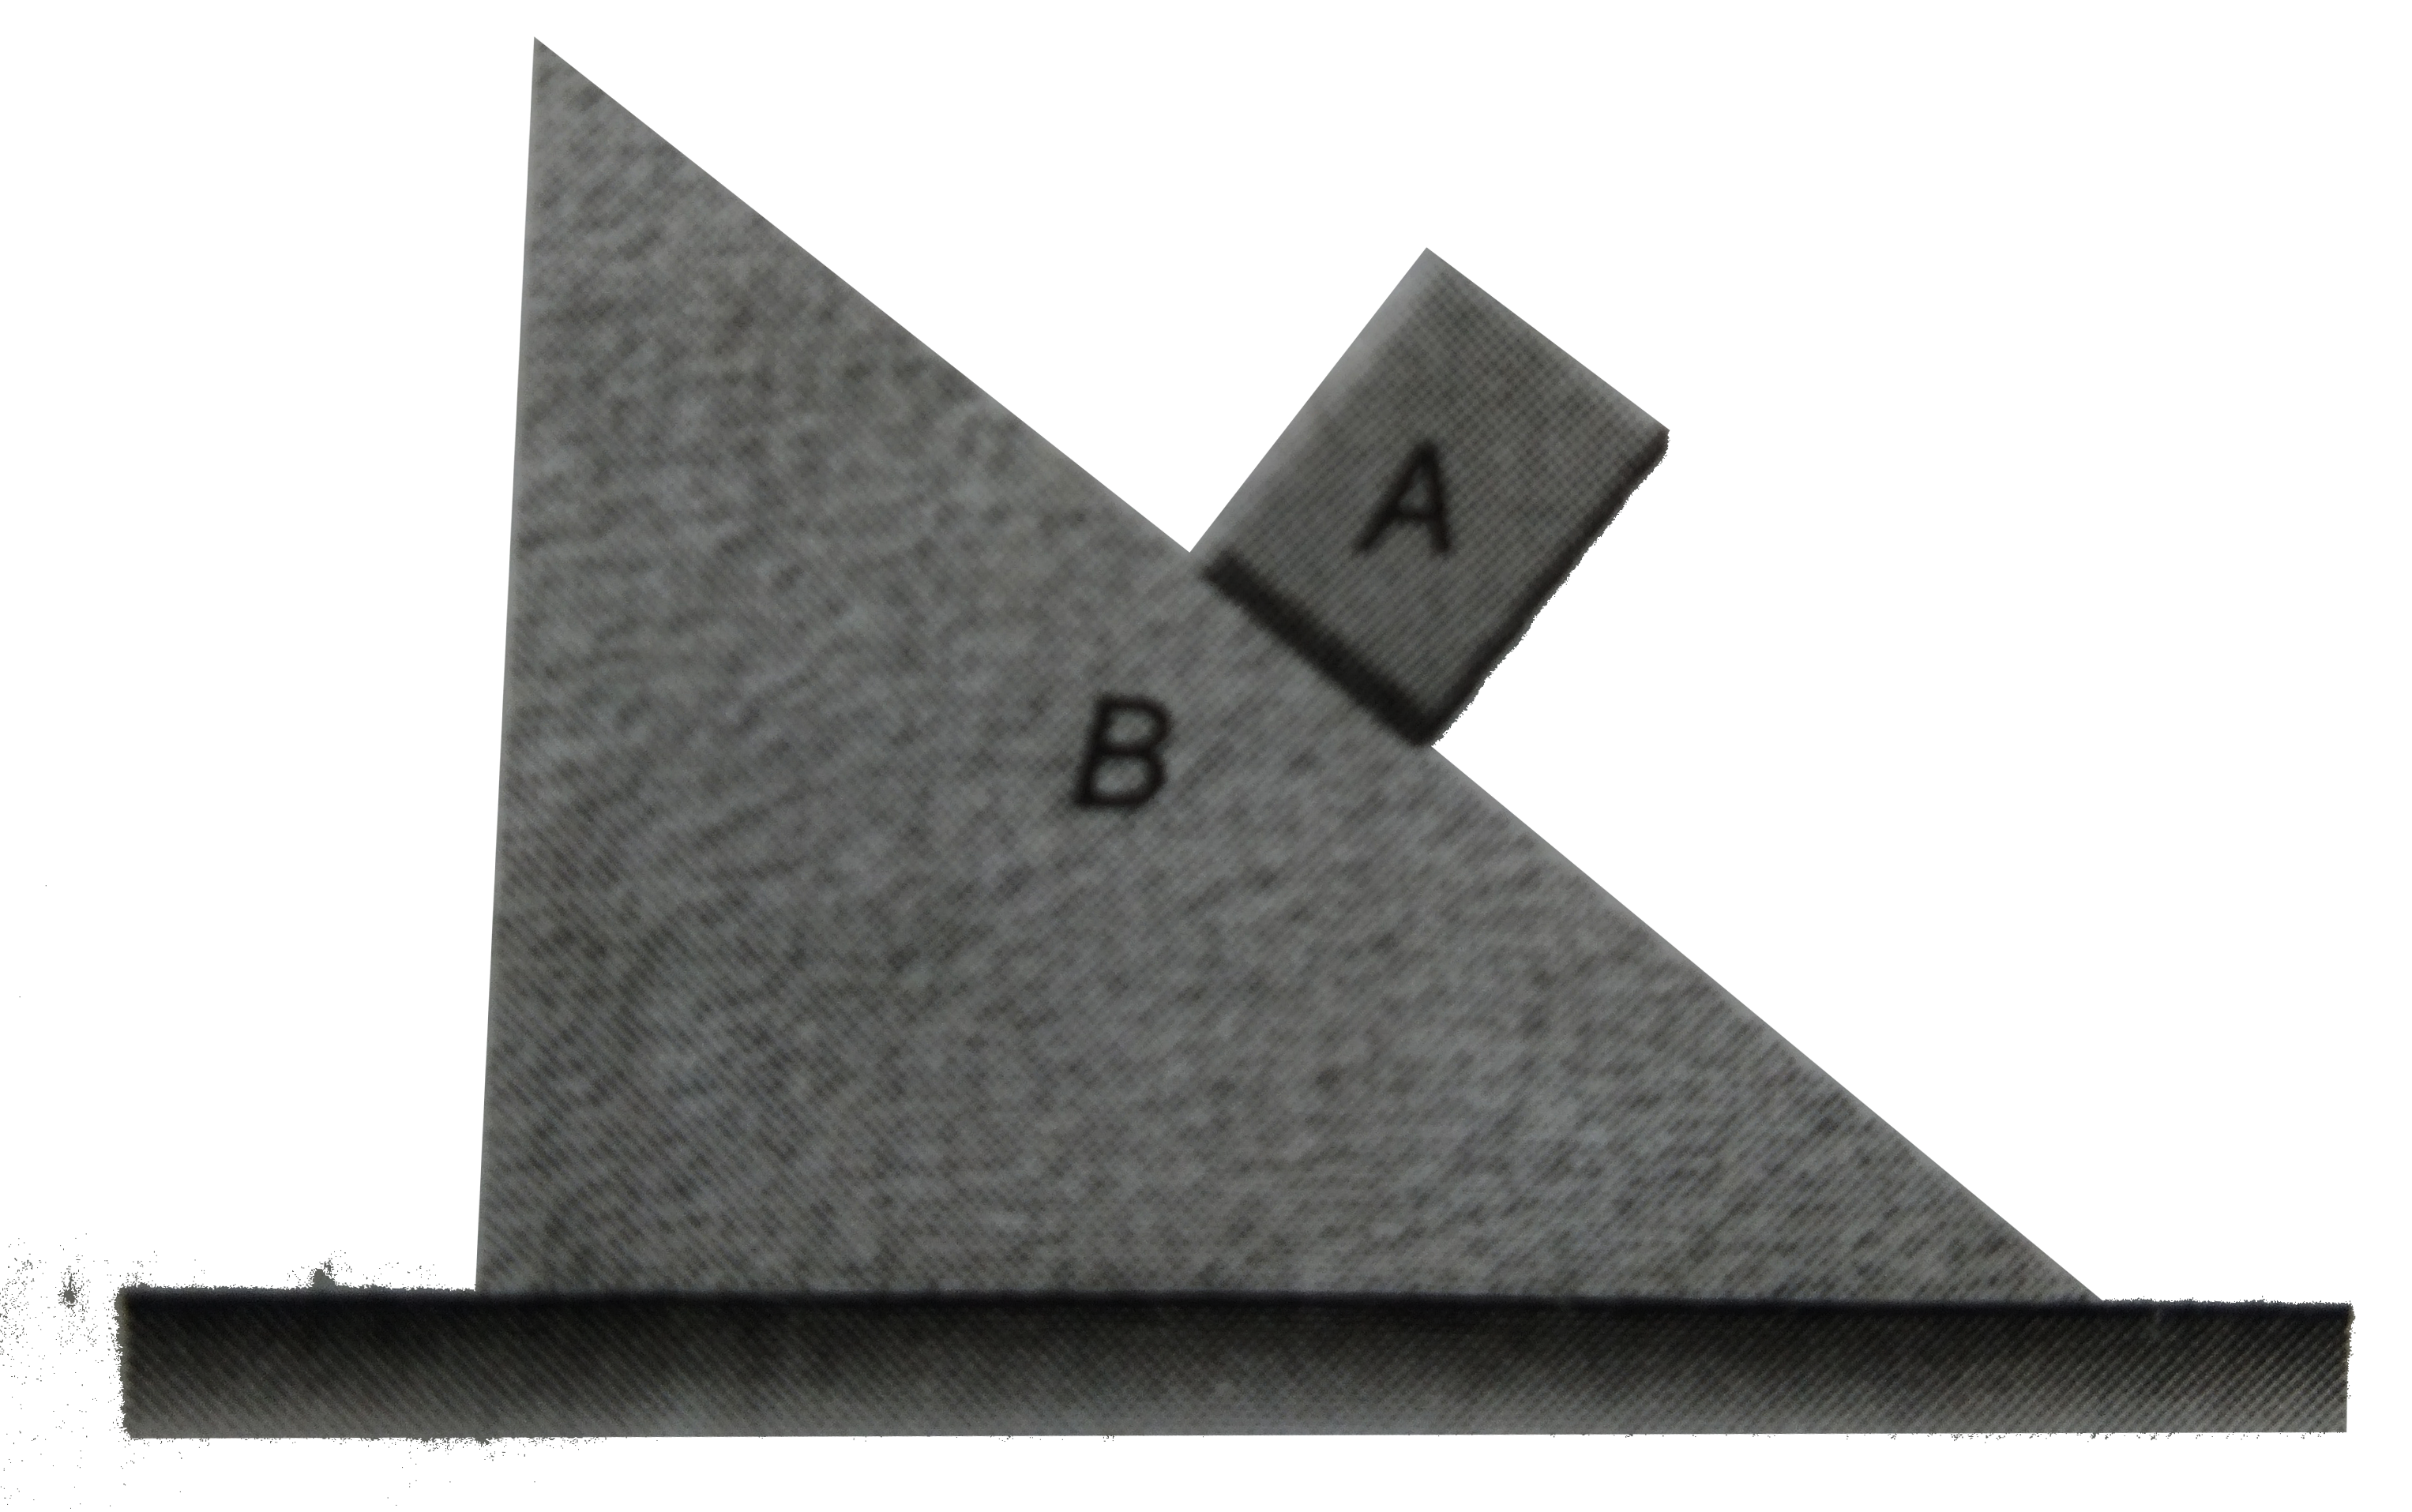 Asseration : All surfaces shown in figure are smooth. Block A comes down along the wedge B. Work done by normal reaction (between A and B) on B is positive while on A it is negative.   Reason : Angle between normal reaction and net desplacement of A is greater than 90^(@) while between normal reaction and net displacement of B is less than 90^(@)   .